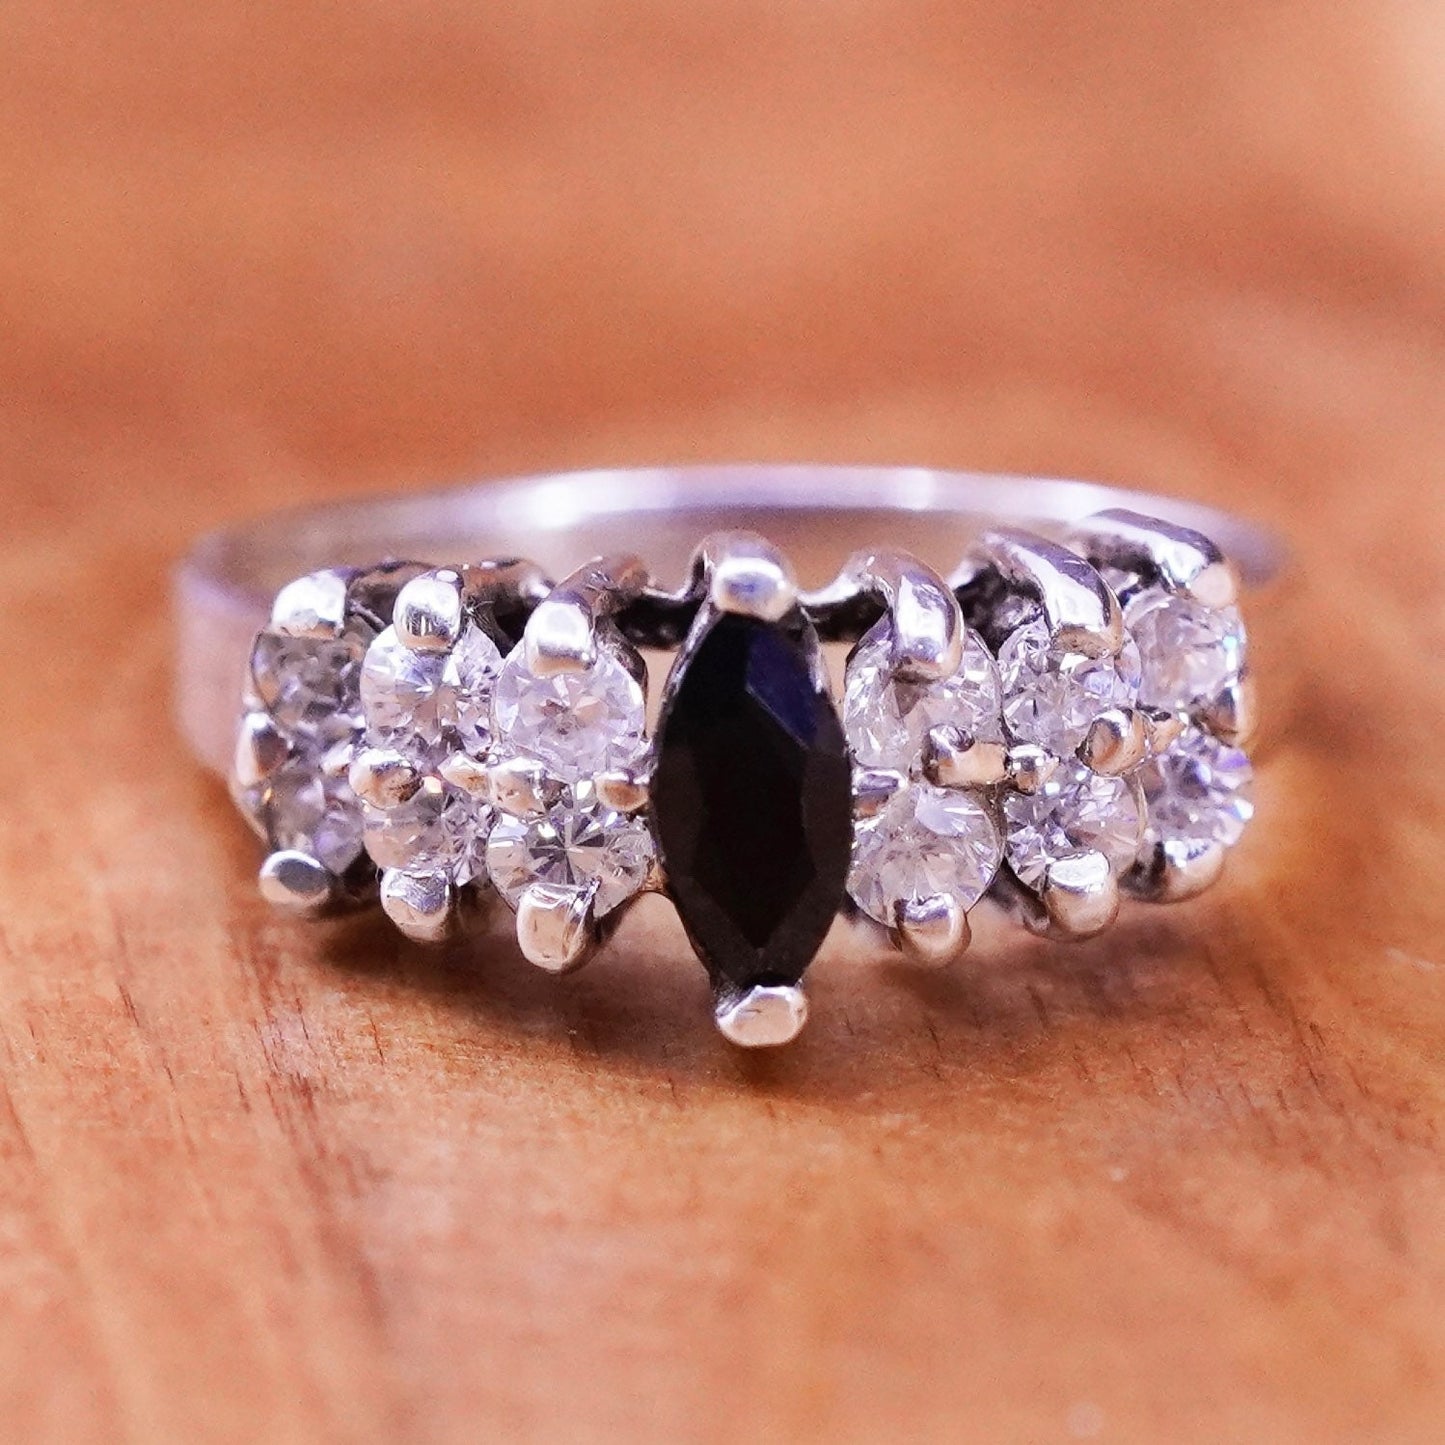 Size 4.75, Vintage Sterling 925 silver handmade ring with obsidian and cz